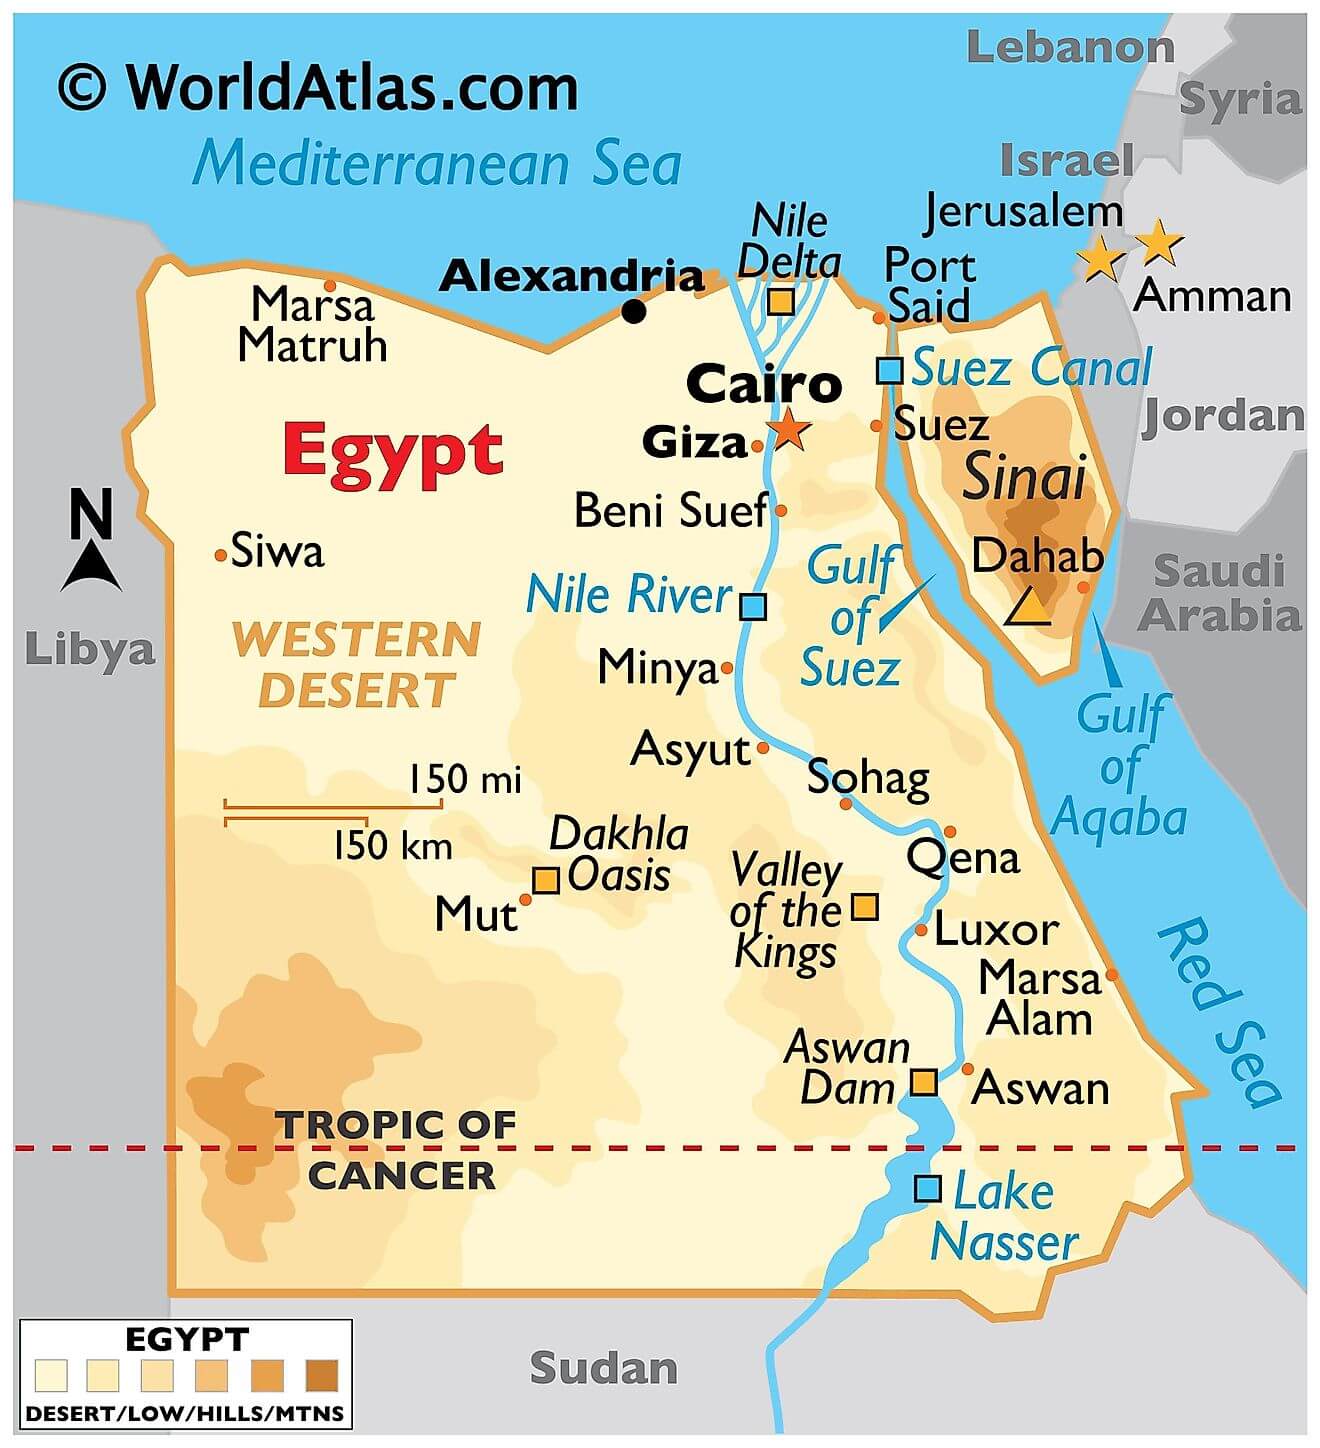 Physical Map of Egypt